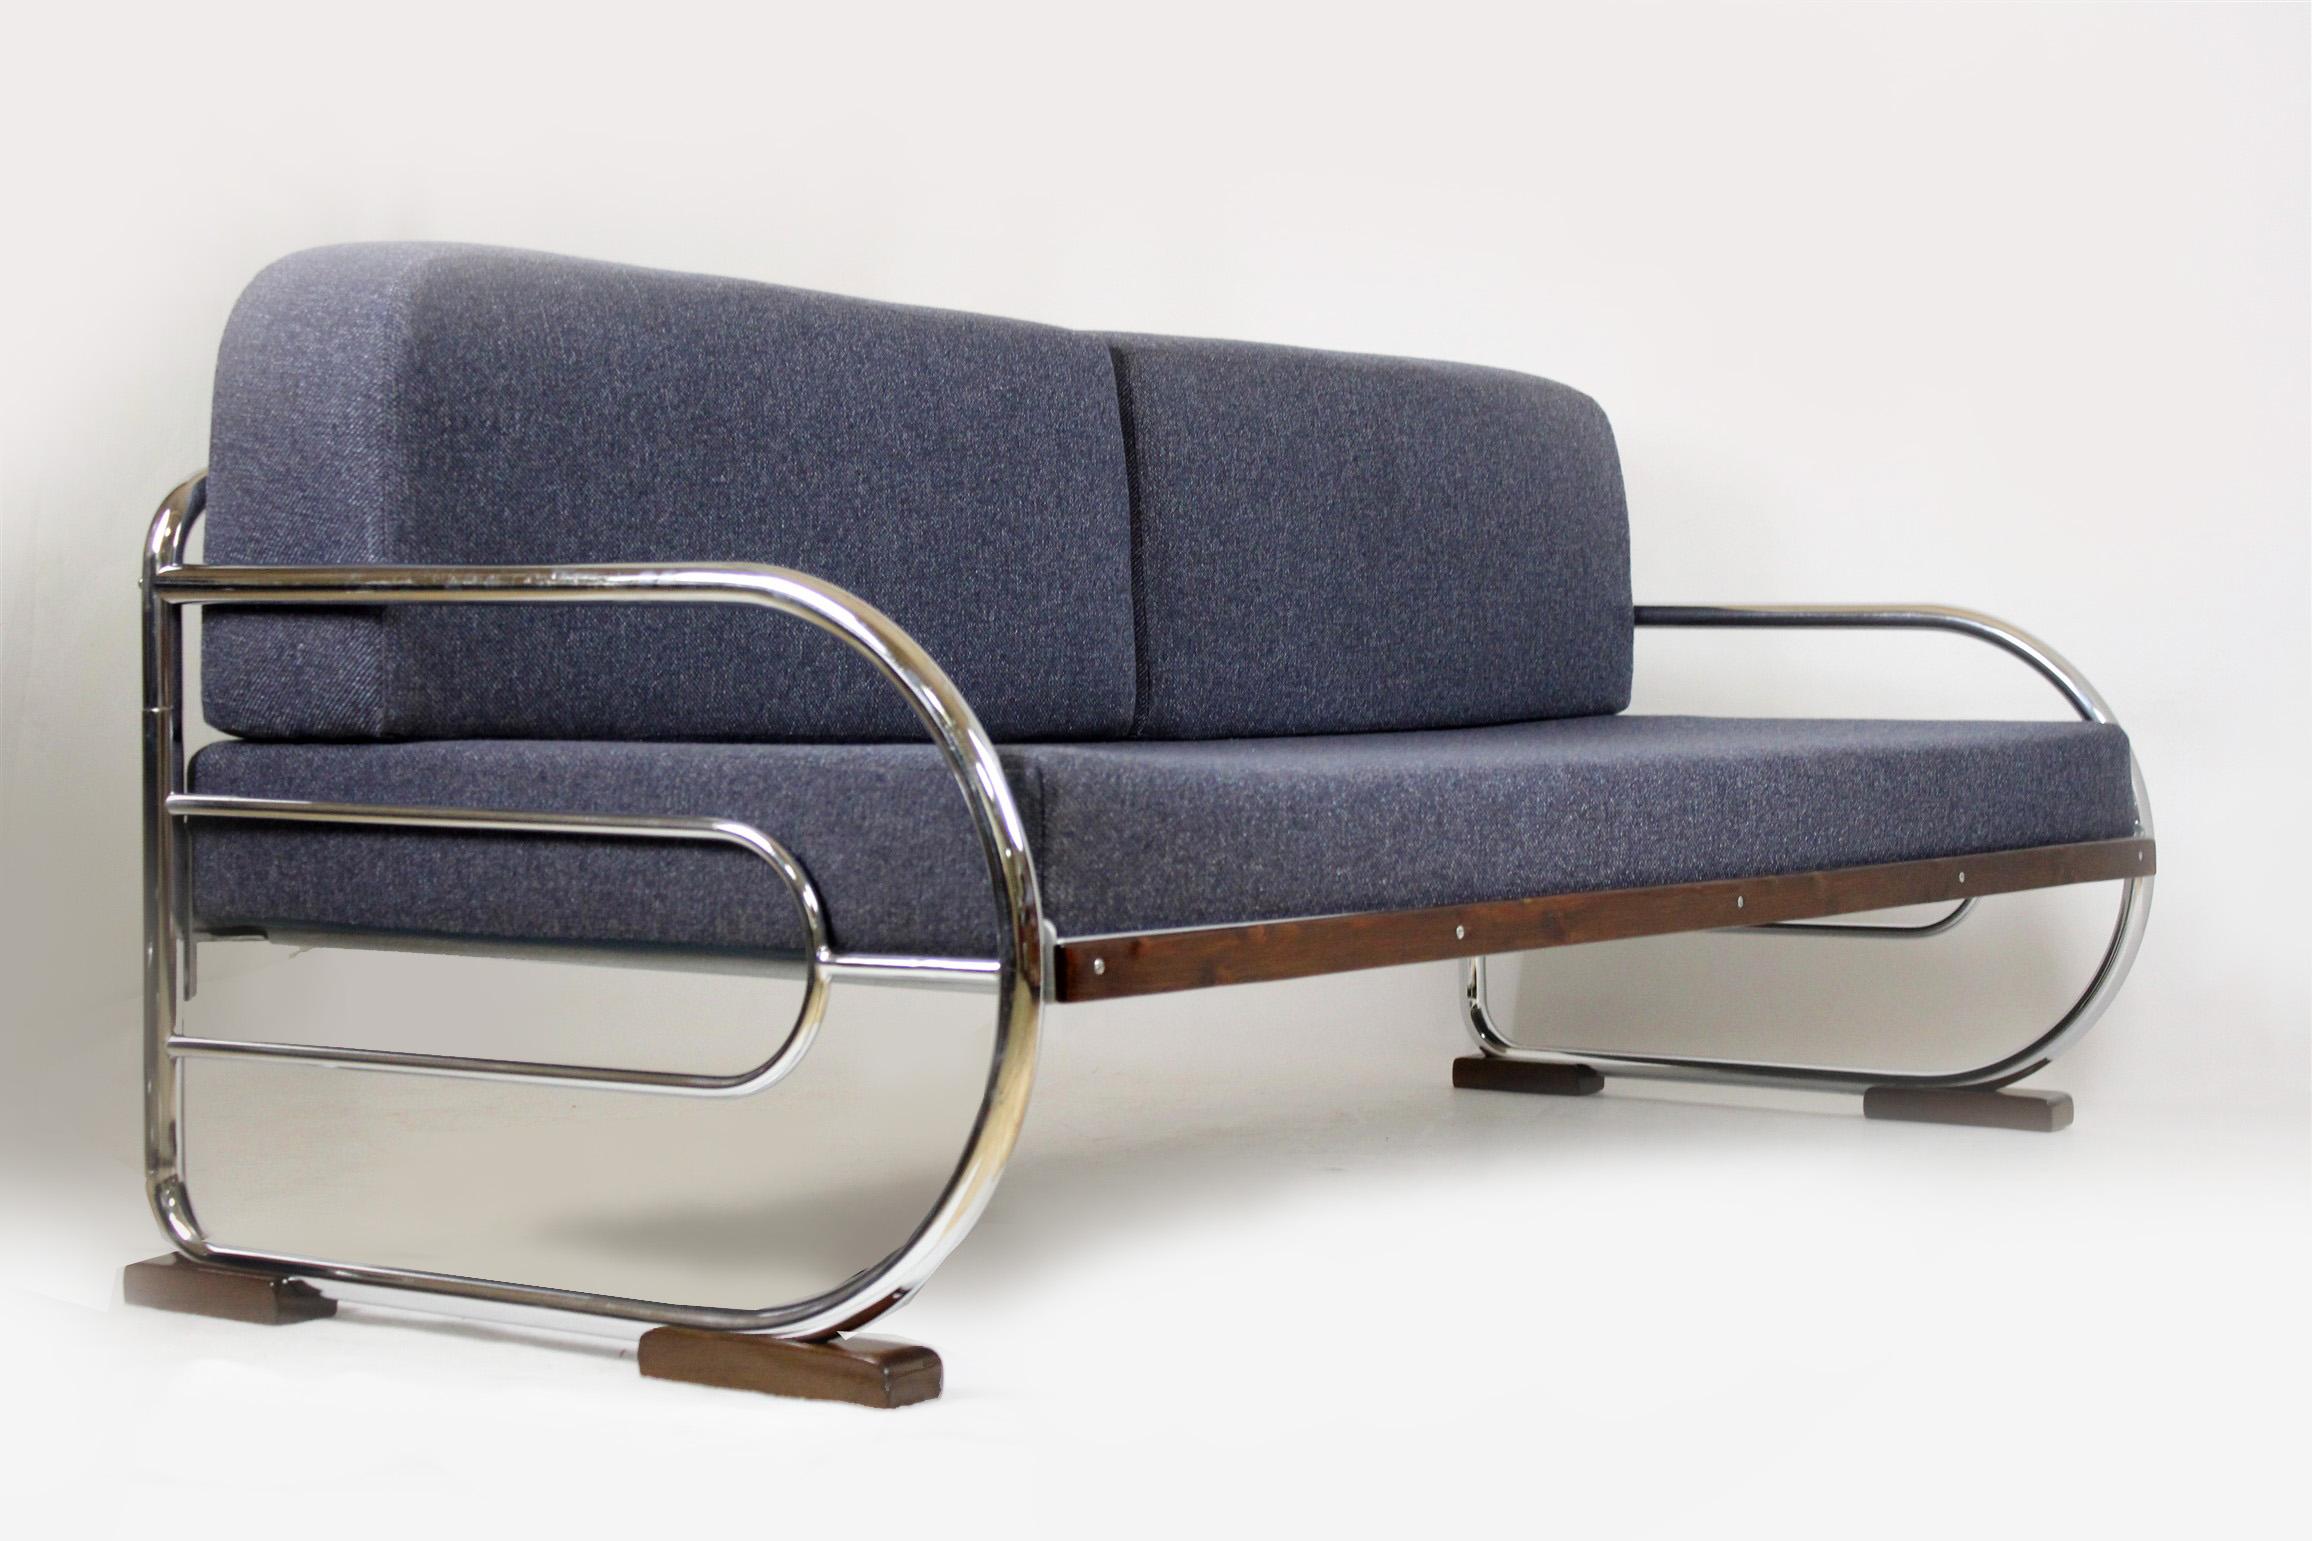 Bauhaus style sofa with a lacquered wood and chrome tubular steel frame. Manufactured by Hynek Gottwald in the 1930s. Brand new mattresses upholstered with fabric that is resistant to dirt and abrasion. Woodwork has been restored, chrome is in its